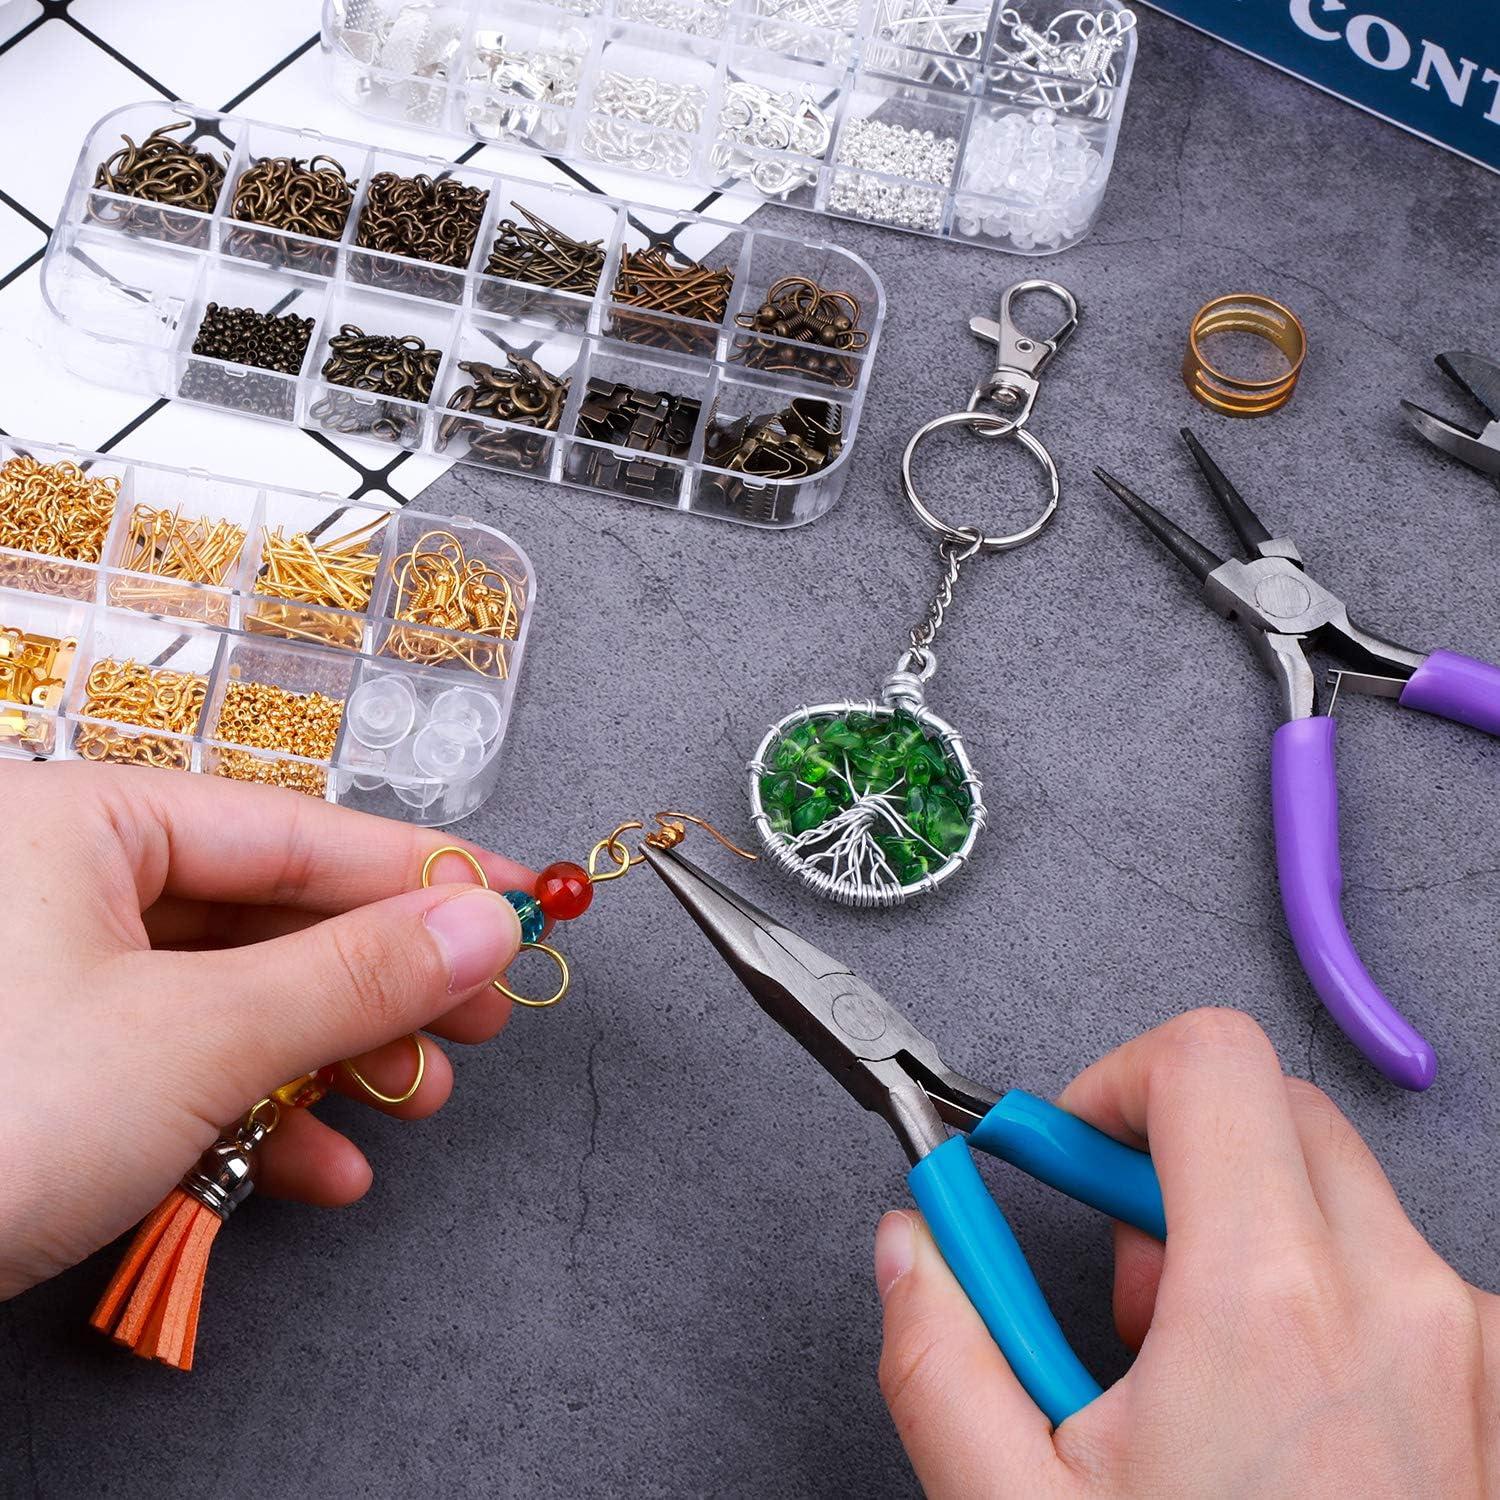 Jewelry Making Supplies Kit Paxcoo Jewelry Making Kit with Jewelry Making  Tools Jewelry Wires and Jewelry Findings for Jewelry Making Repair and  Beading